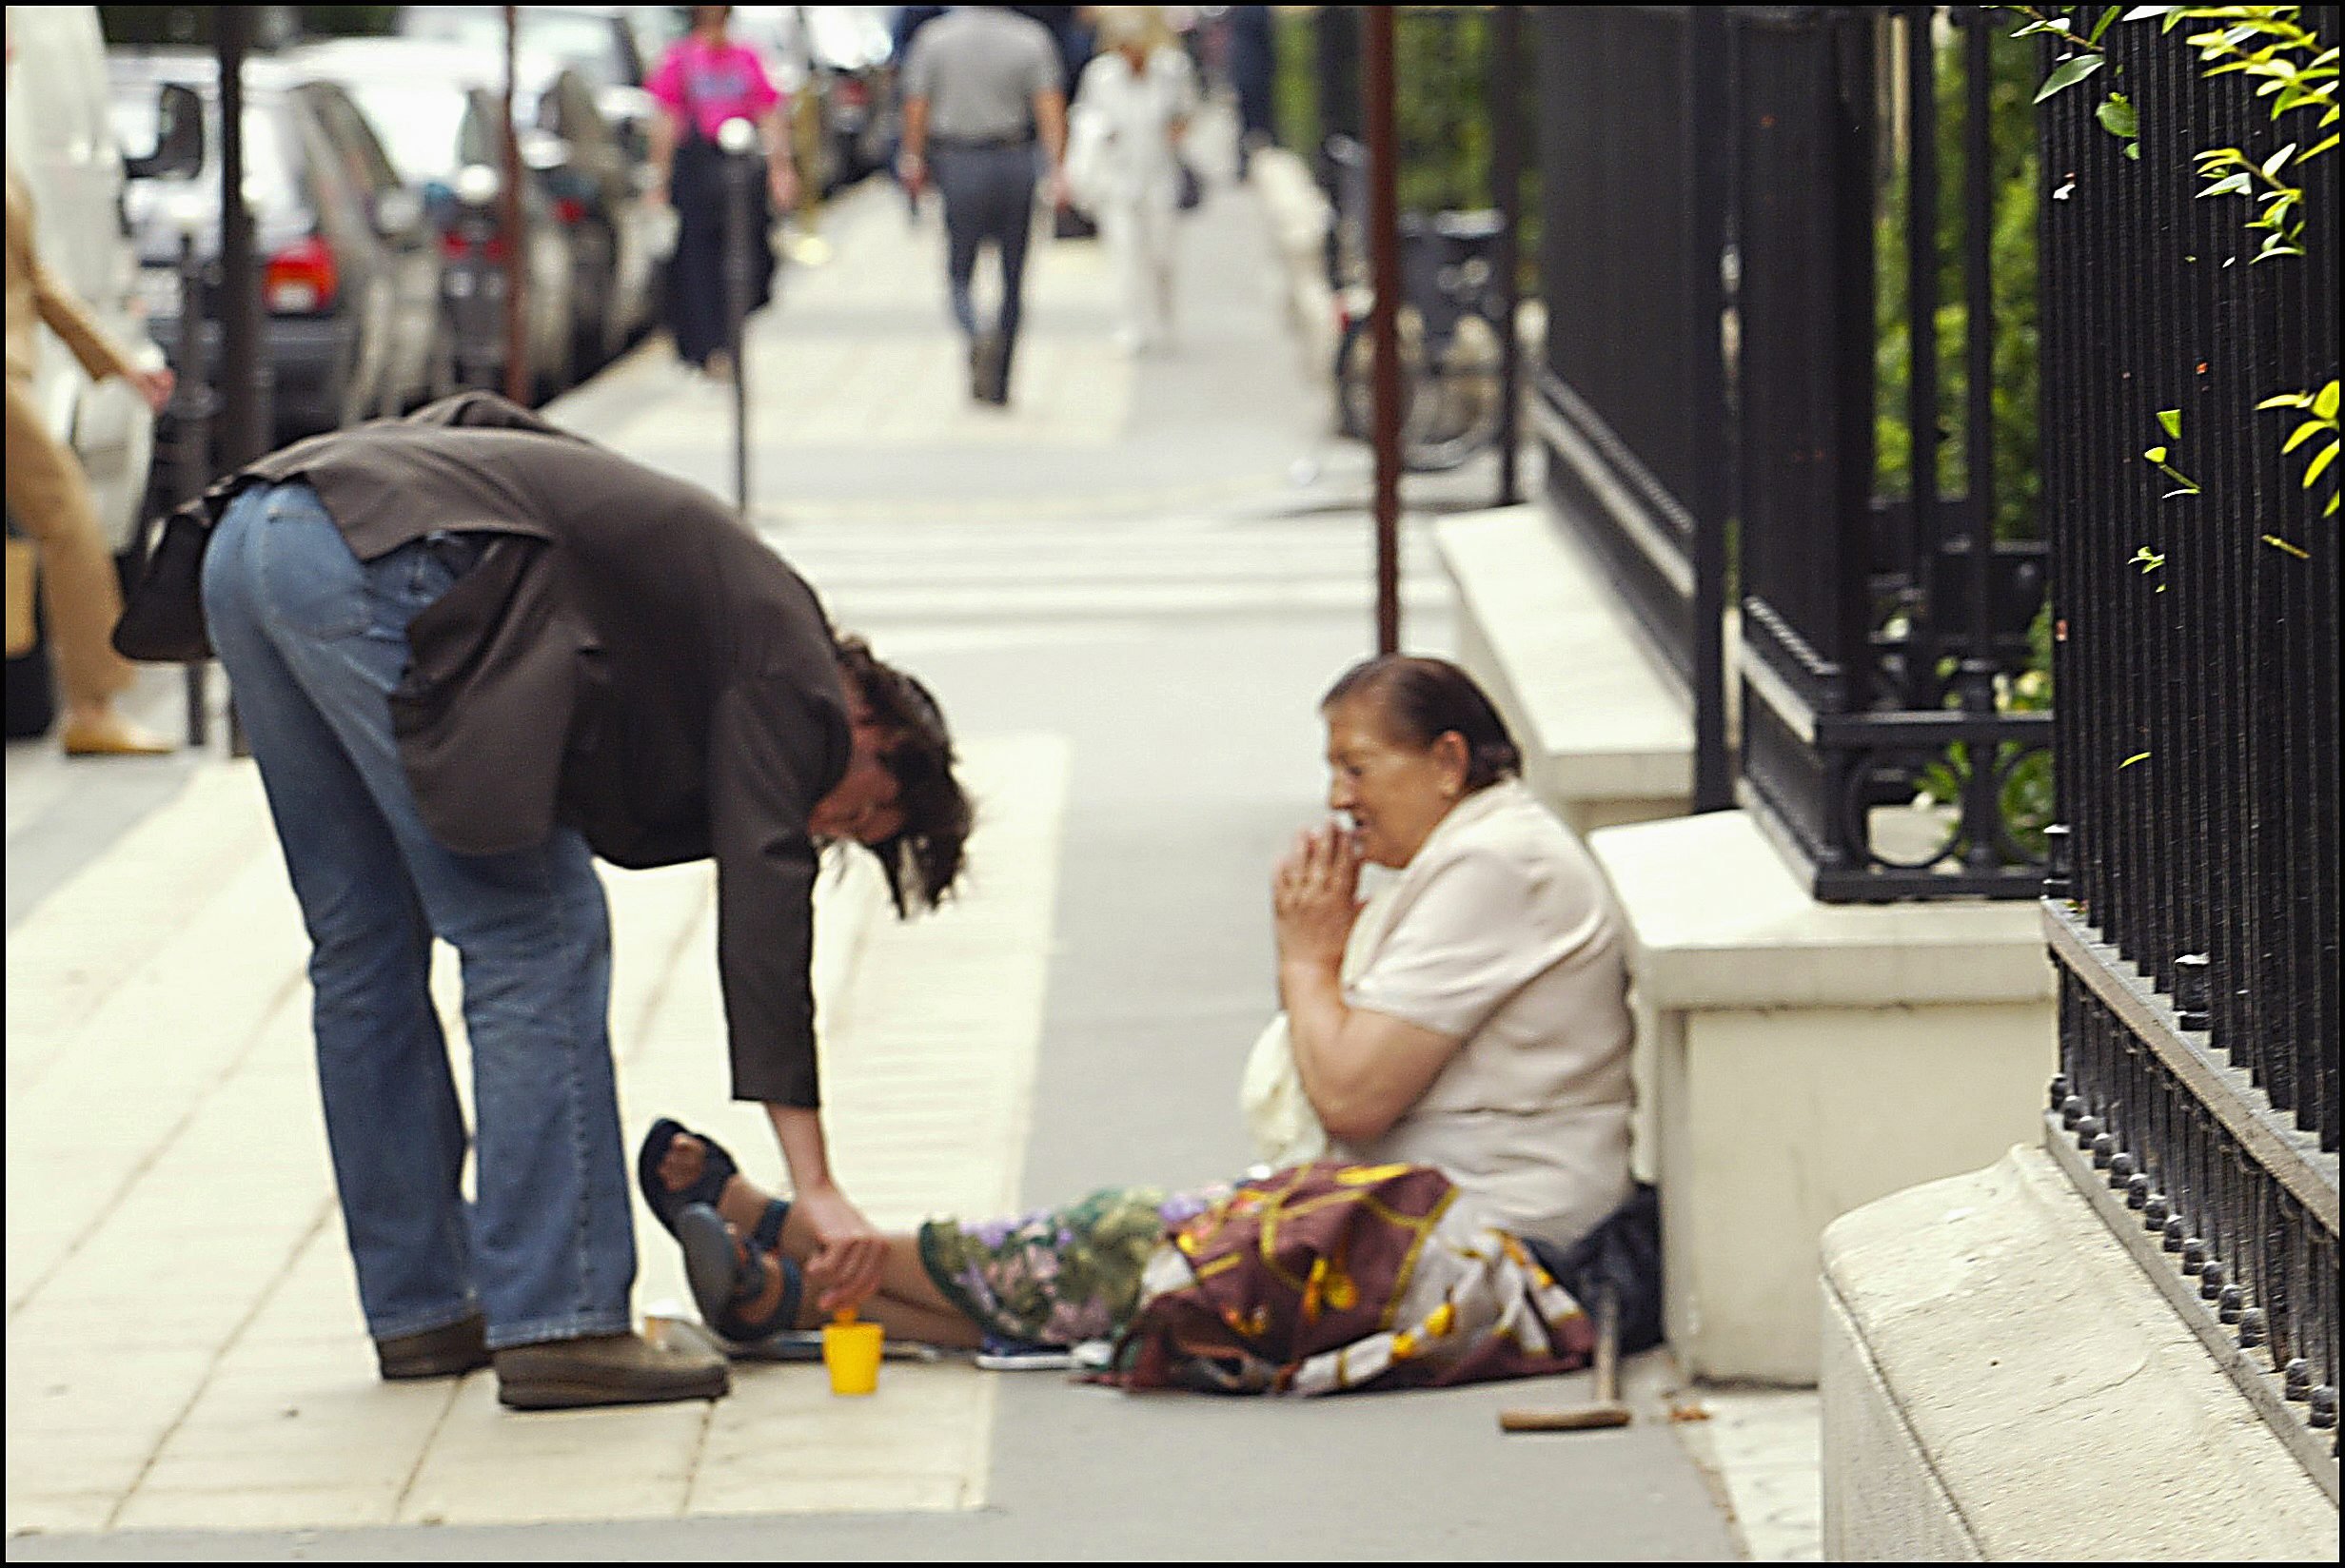 Author Keanu Reeves pictured giving money to a homeless person in the streets of Paris. | Source: Getty Images